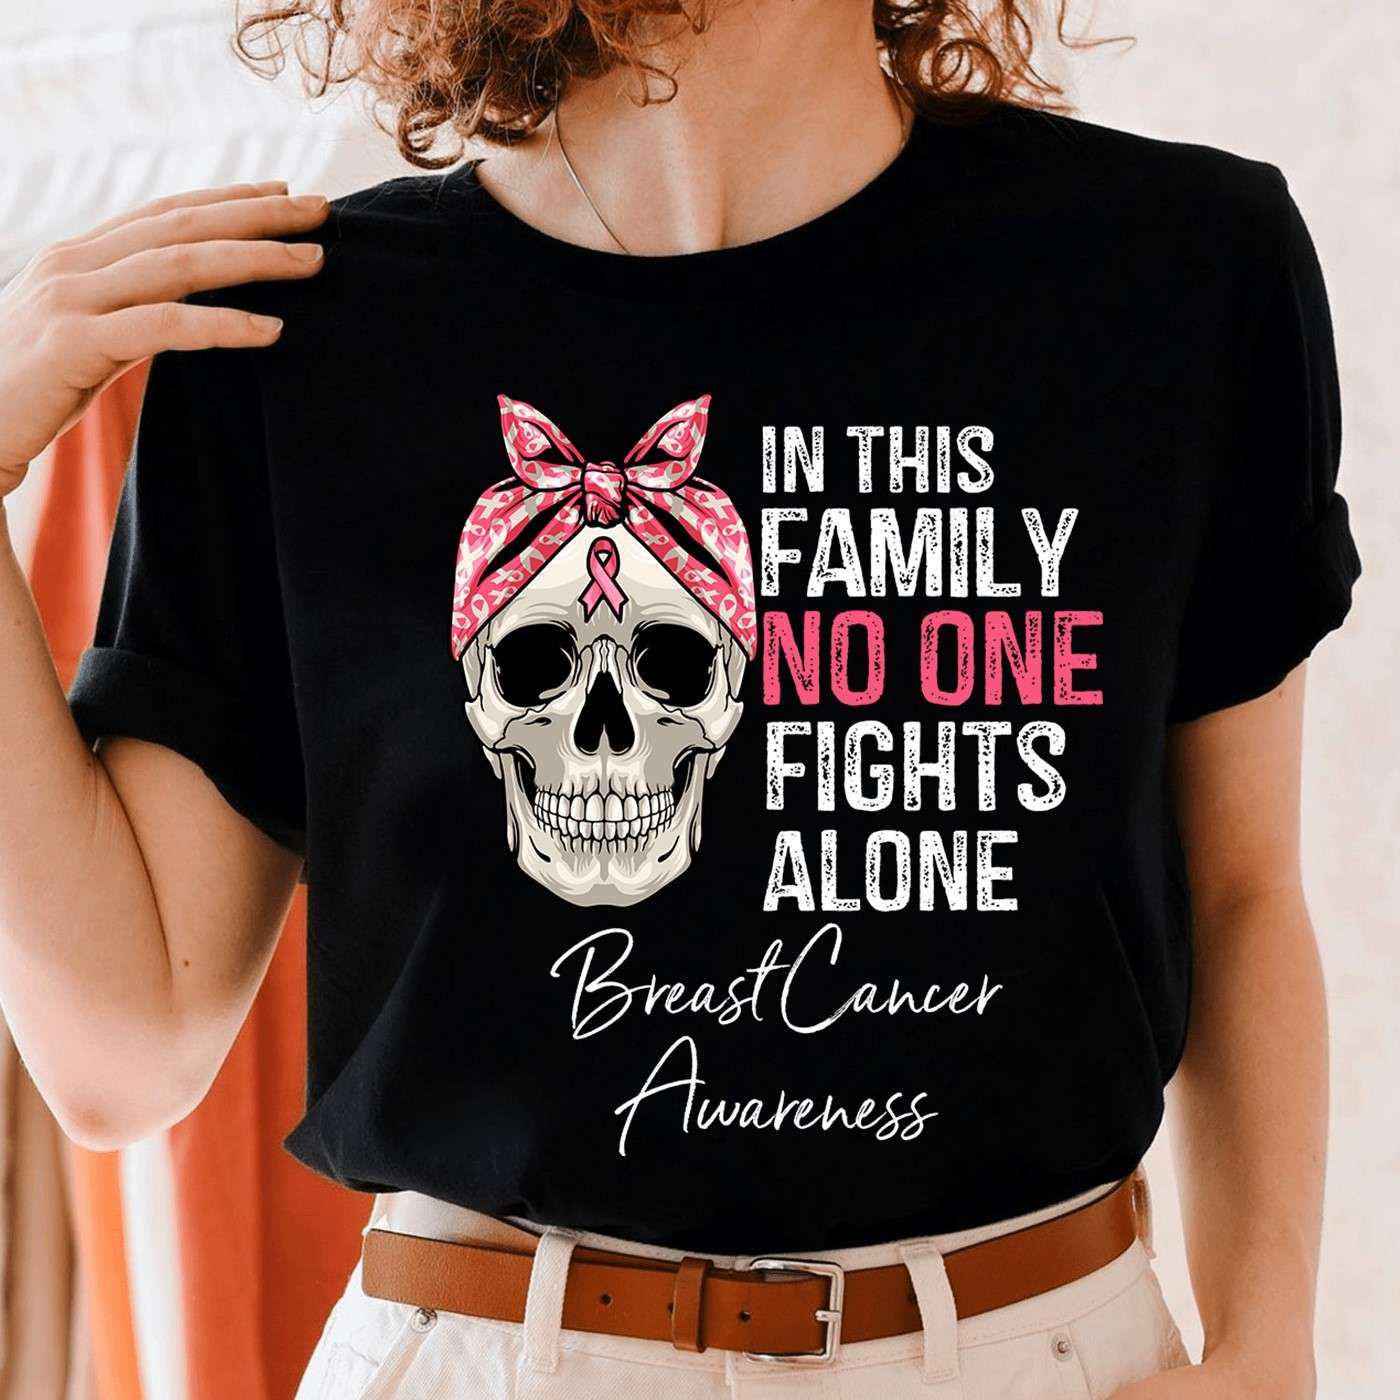 In this family no one fights alone - Breast cancer awareness, skull cancer ribbon